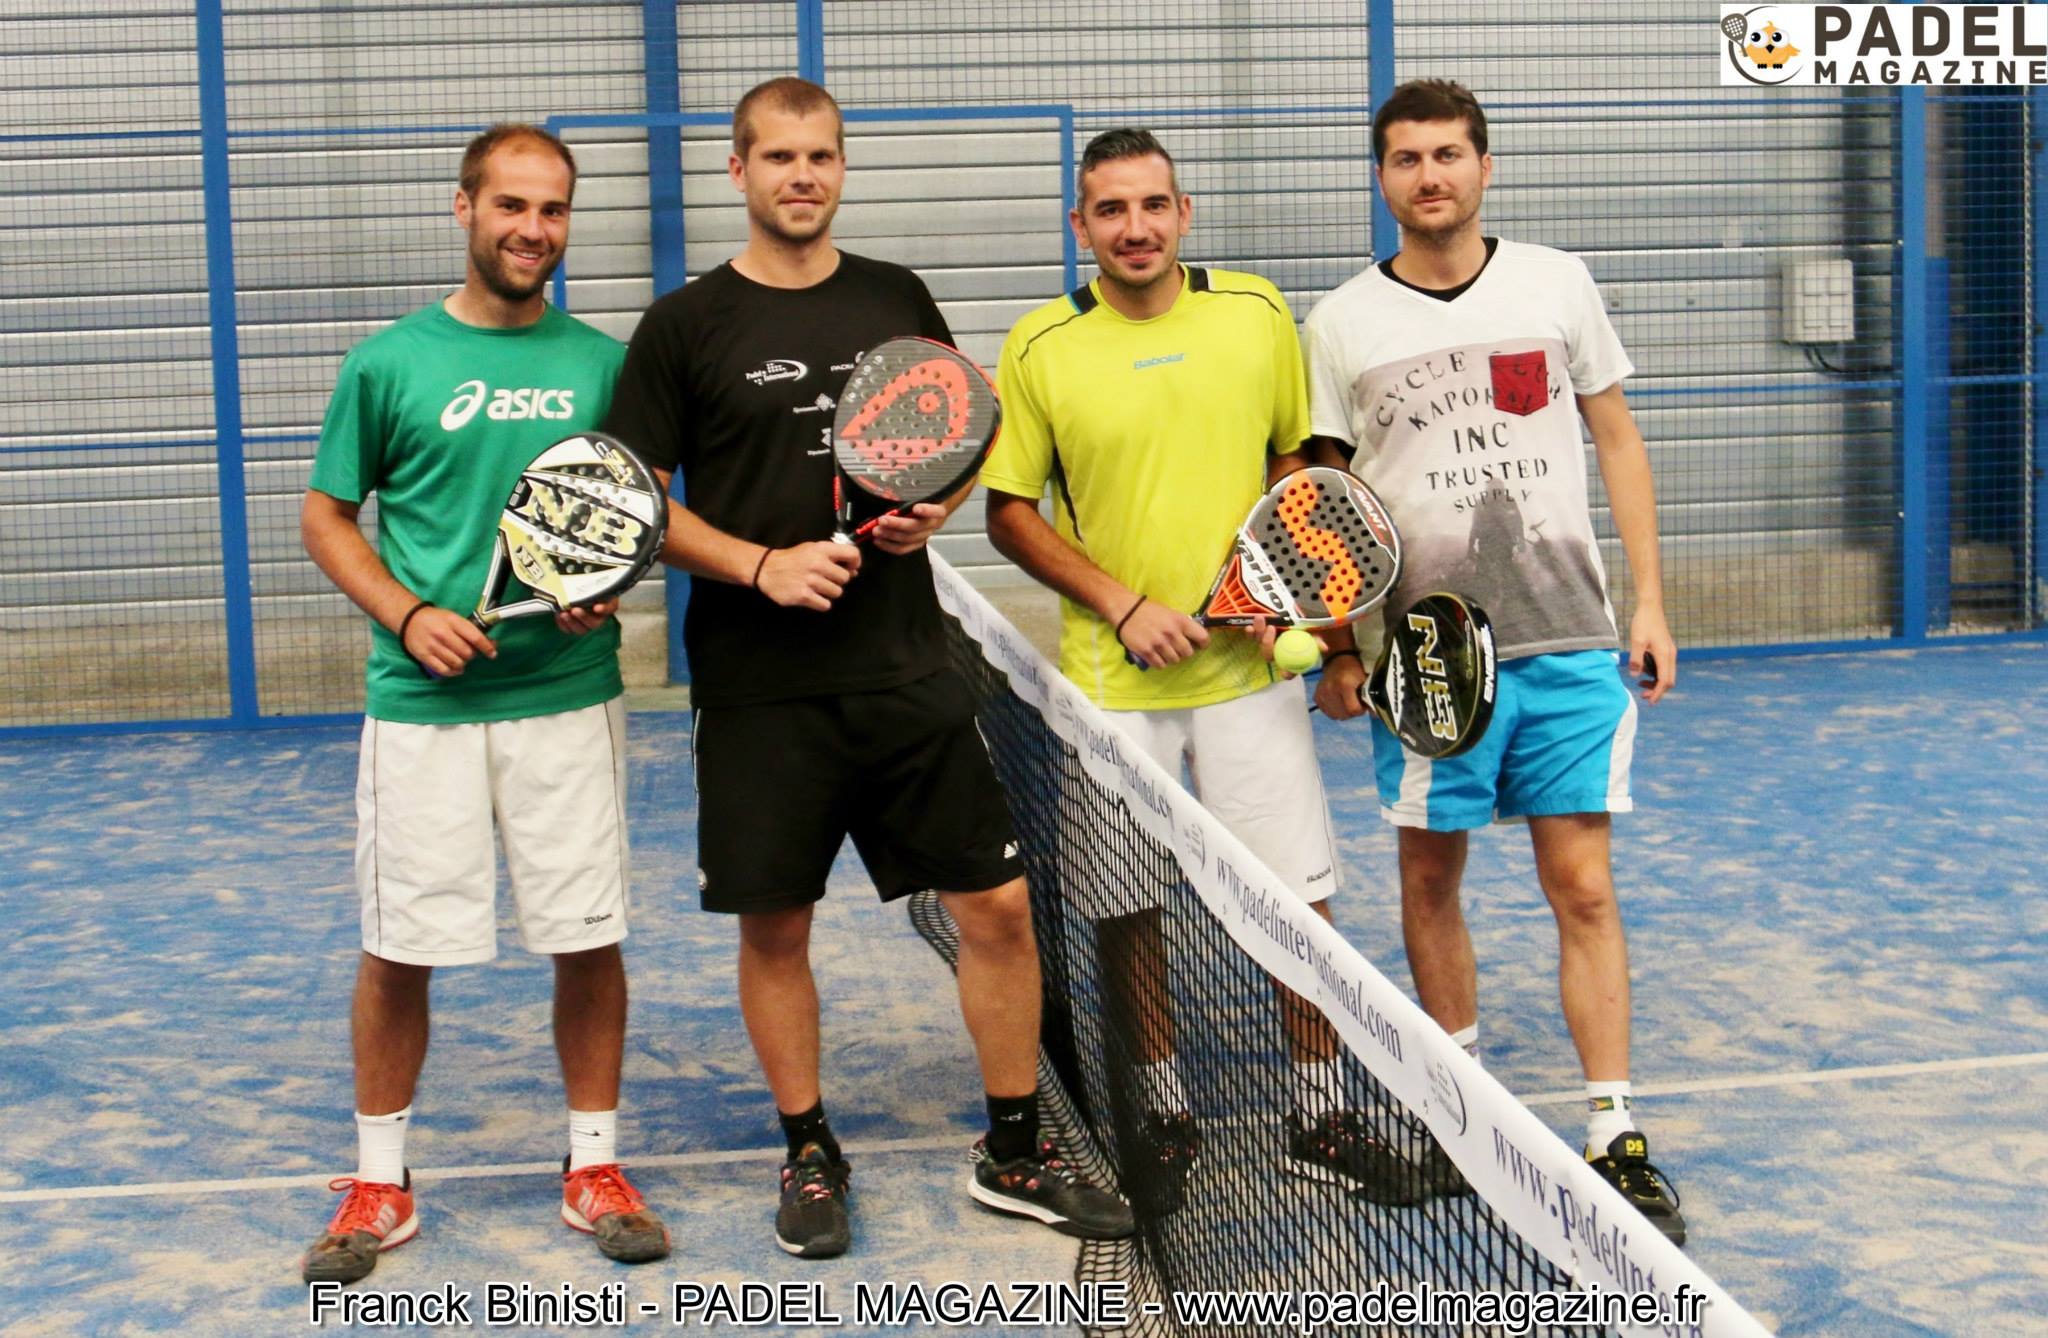 Padel Arena: a land of Laval